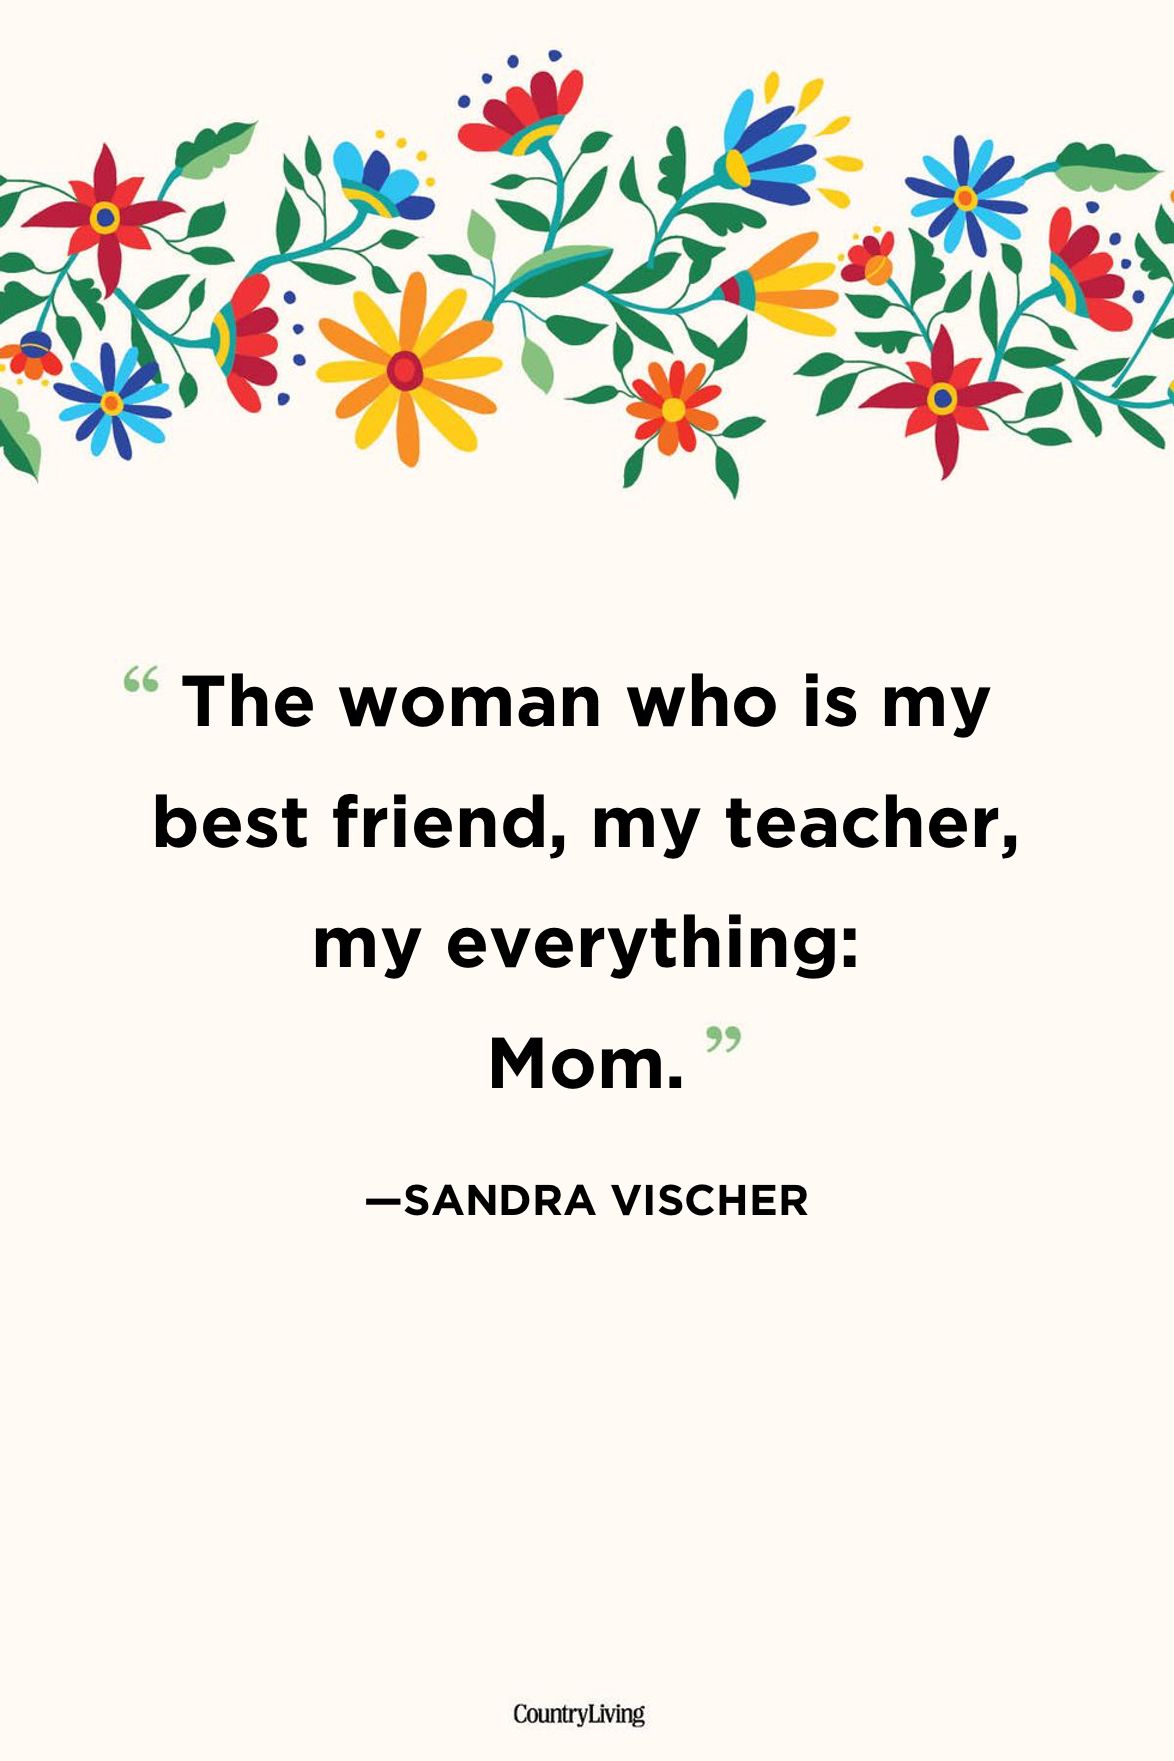 a mother is a daughters best friend quotes